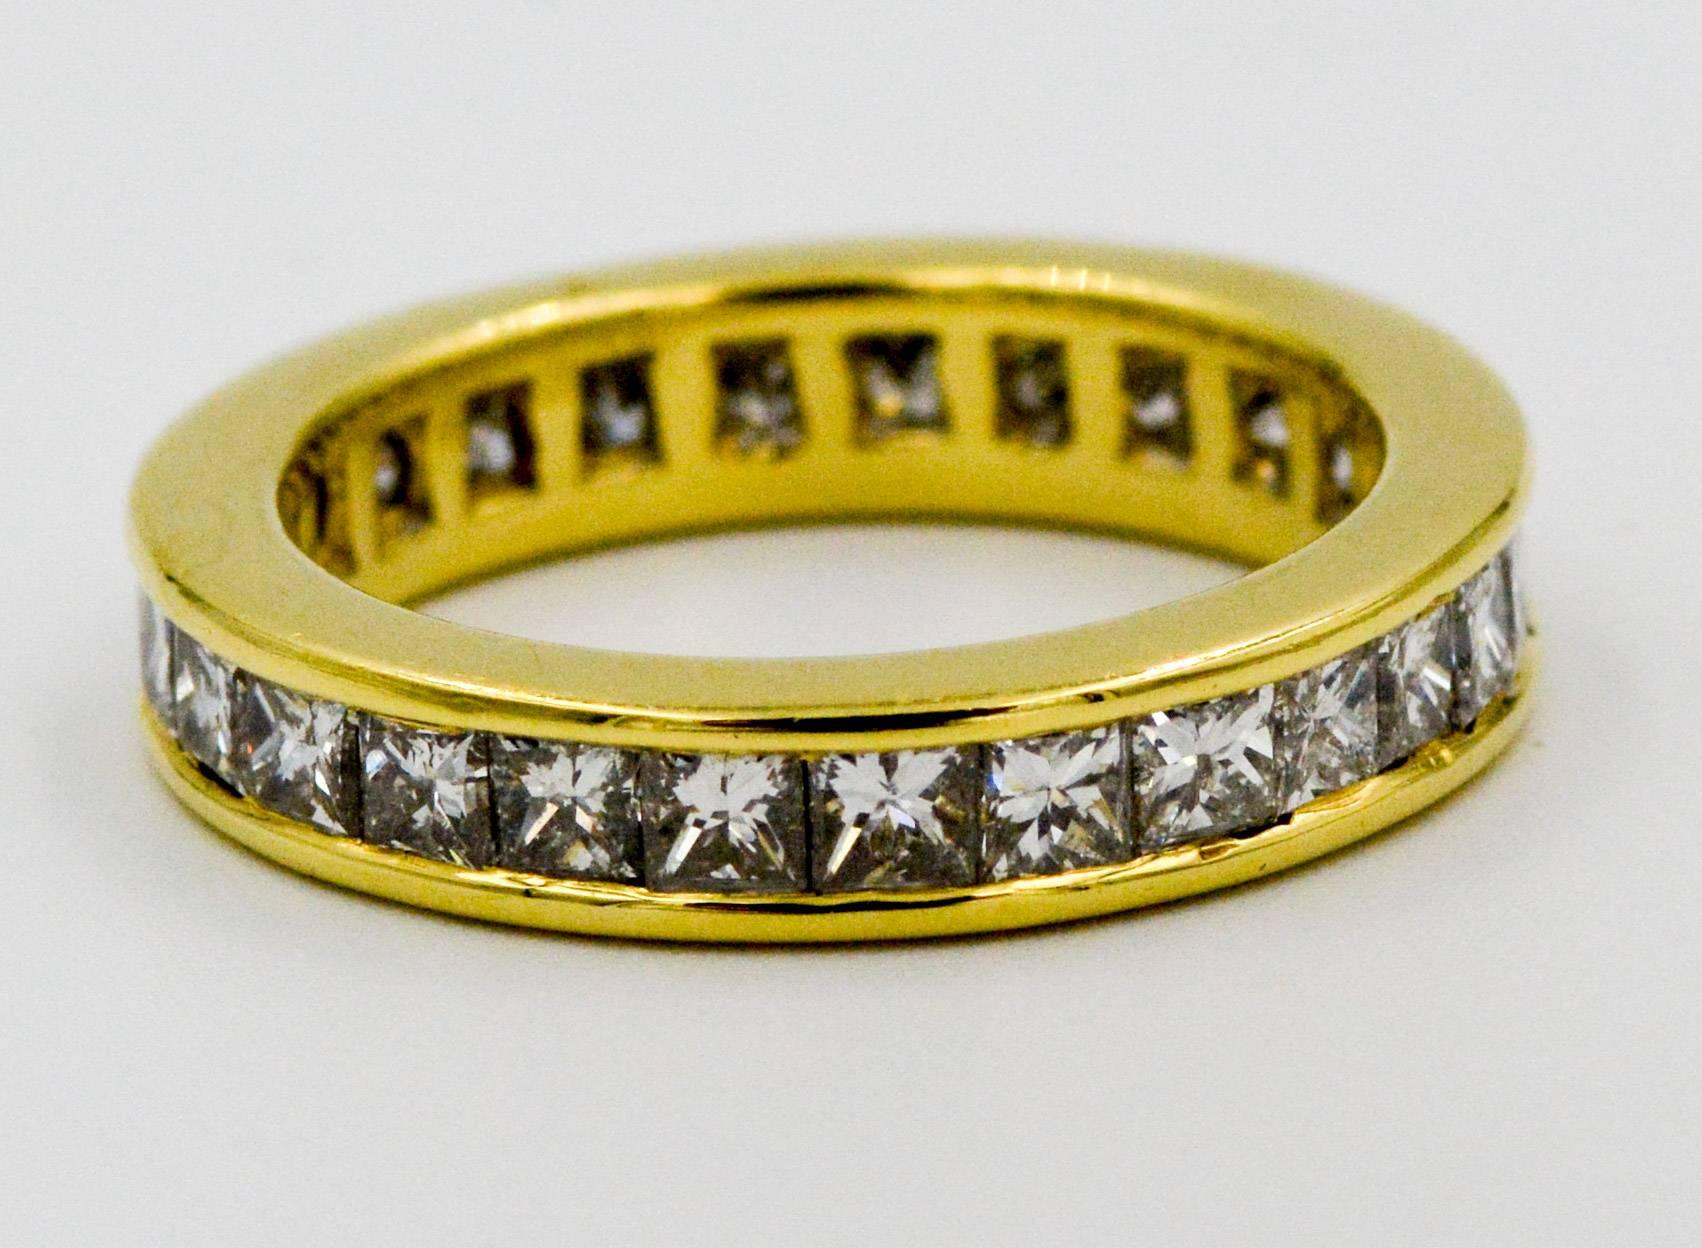 Showing off your classic style is easy when you wear this 18kt yellow gold eternity band ring  featuring 2.00 carats of dazzling channel set princess cut diamonds, H color and SI1 clarity. Ring is a size 5.5.